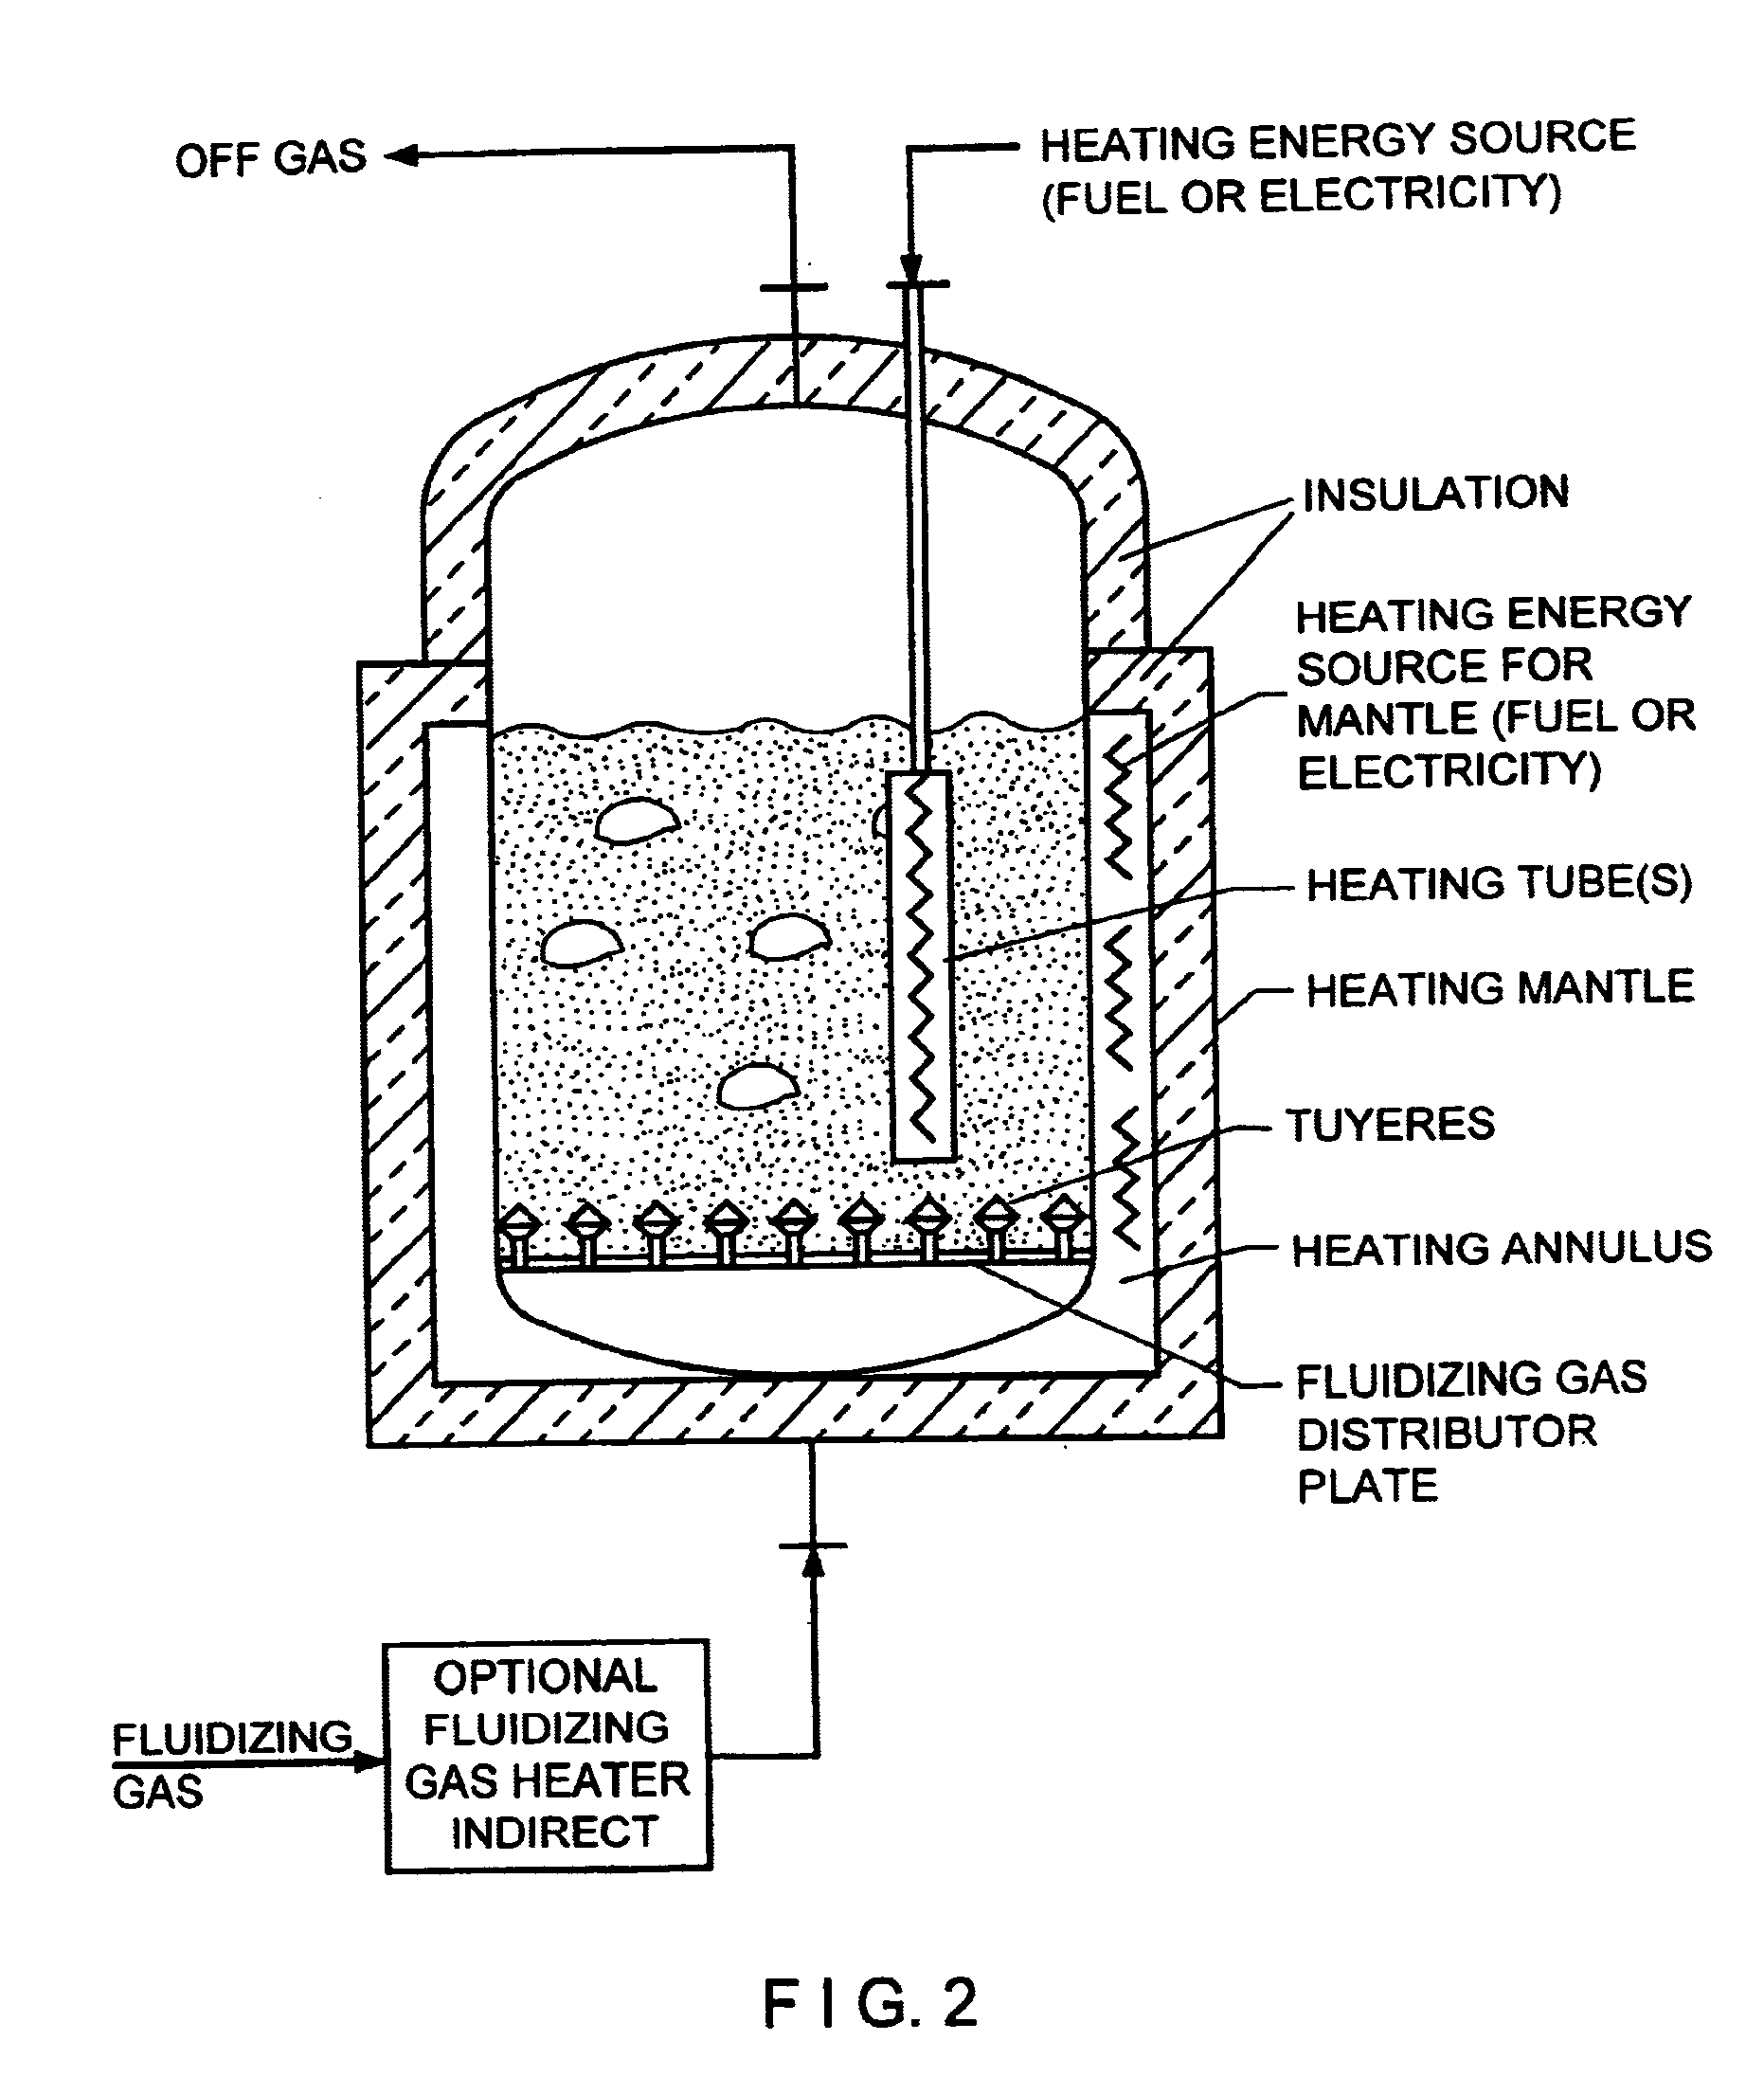 Fluidized bed gas distributor system for elevated temperature operation